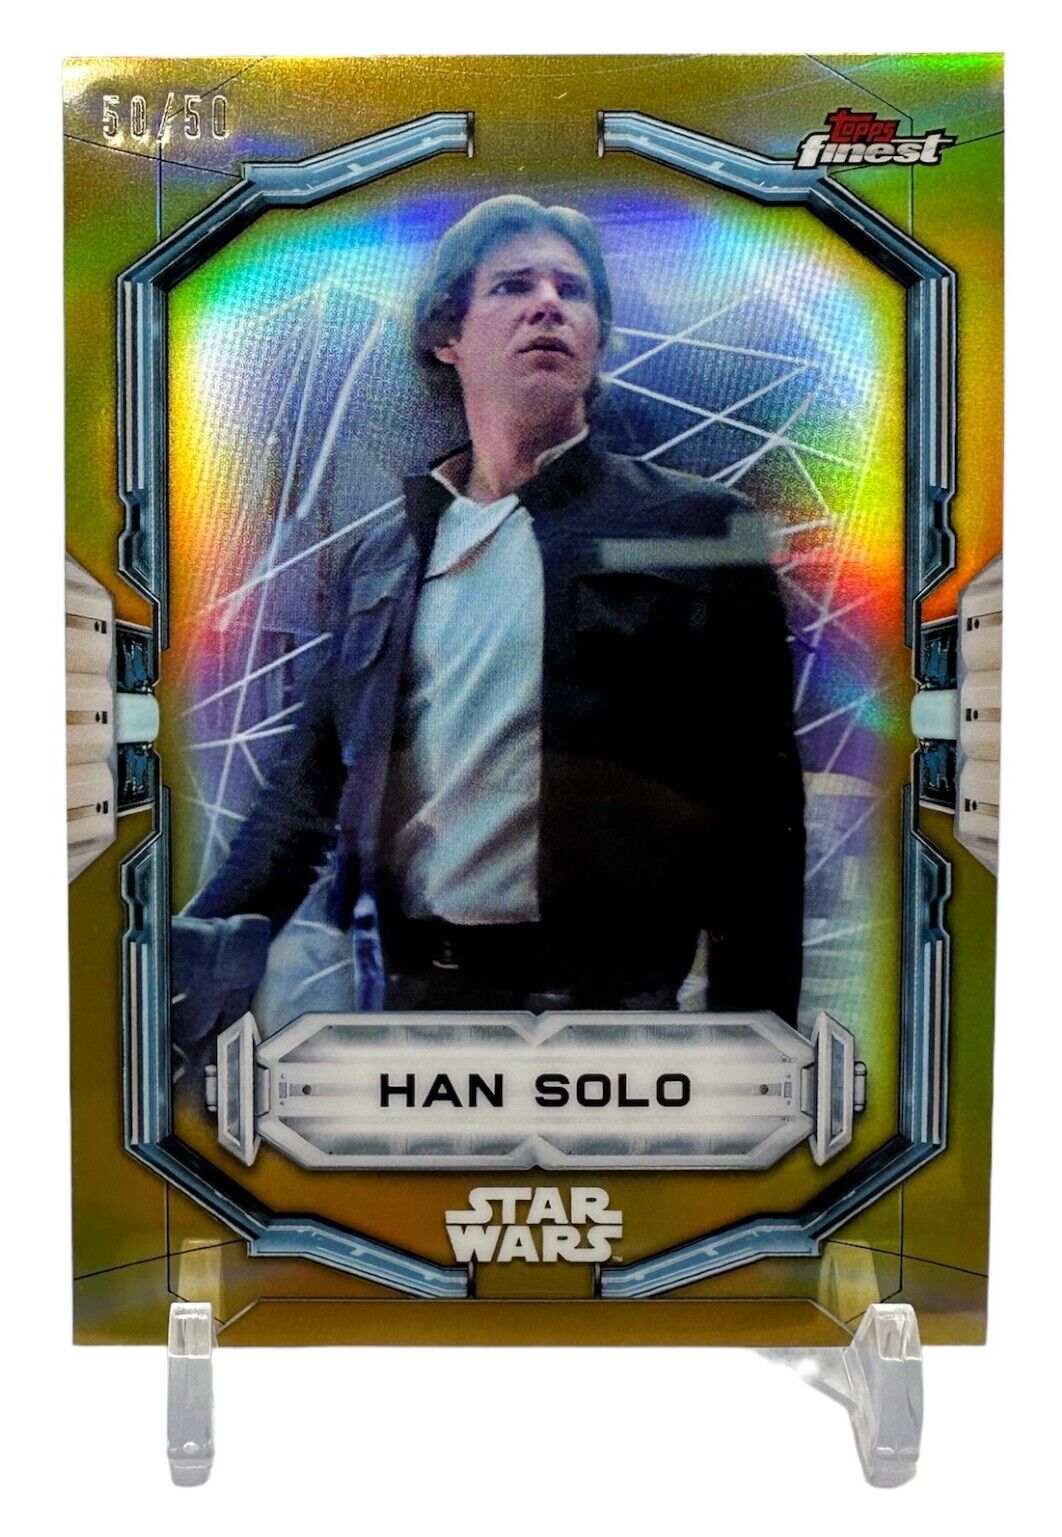 2022 Topps Finest Star Wars Han Solo #47 Gold Refractor Serial Number 50/50